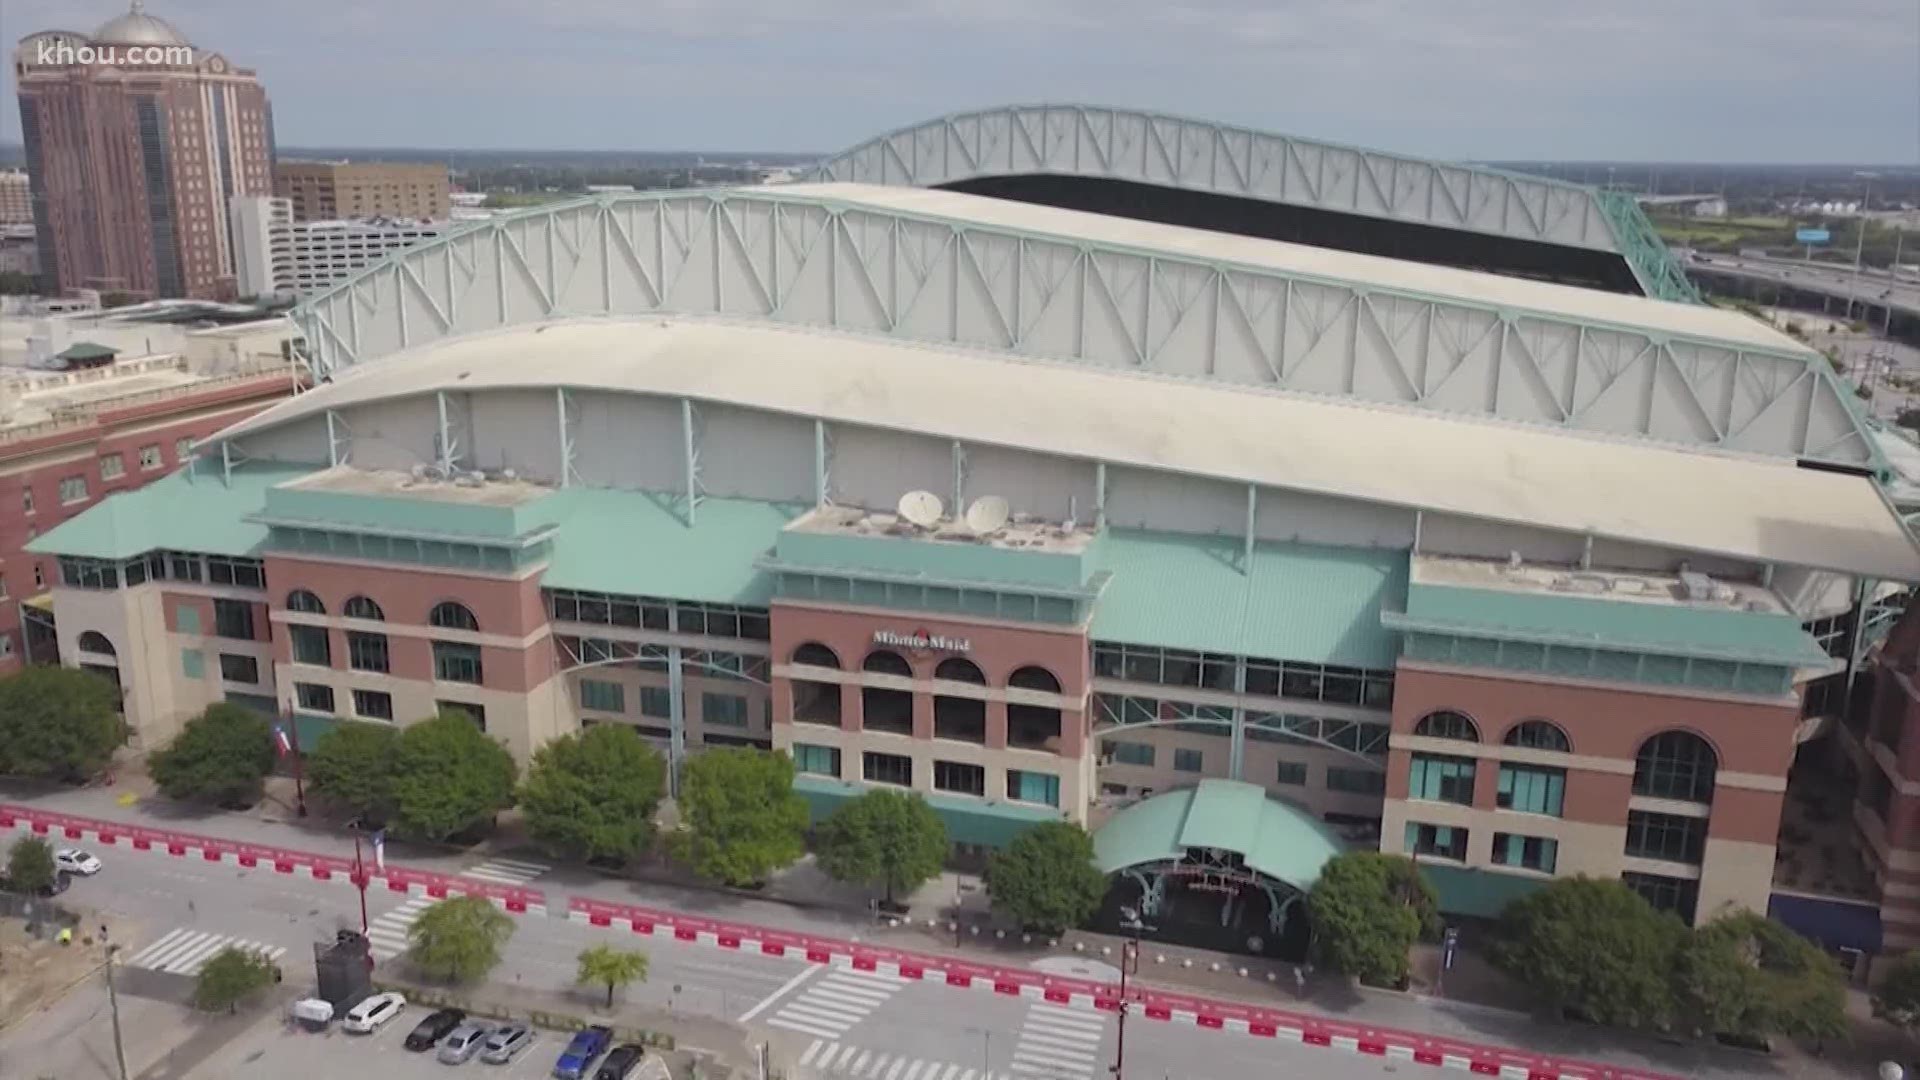 Astros, state provide COVID-19 testing at Minute Maid Park